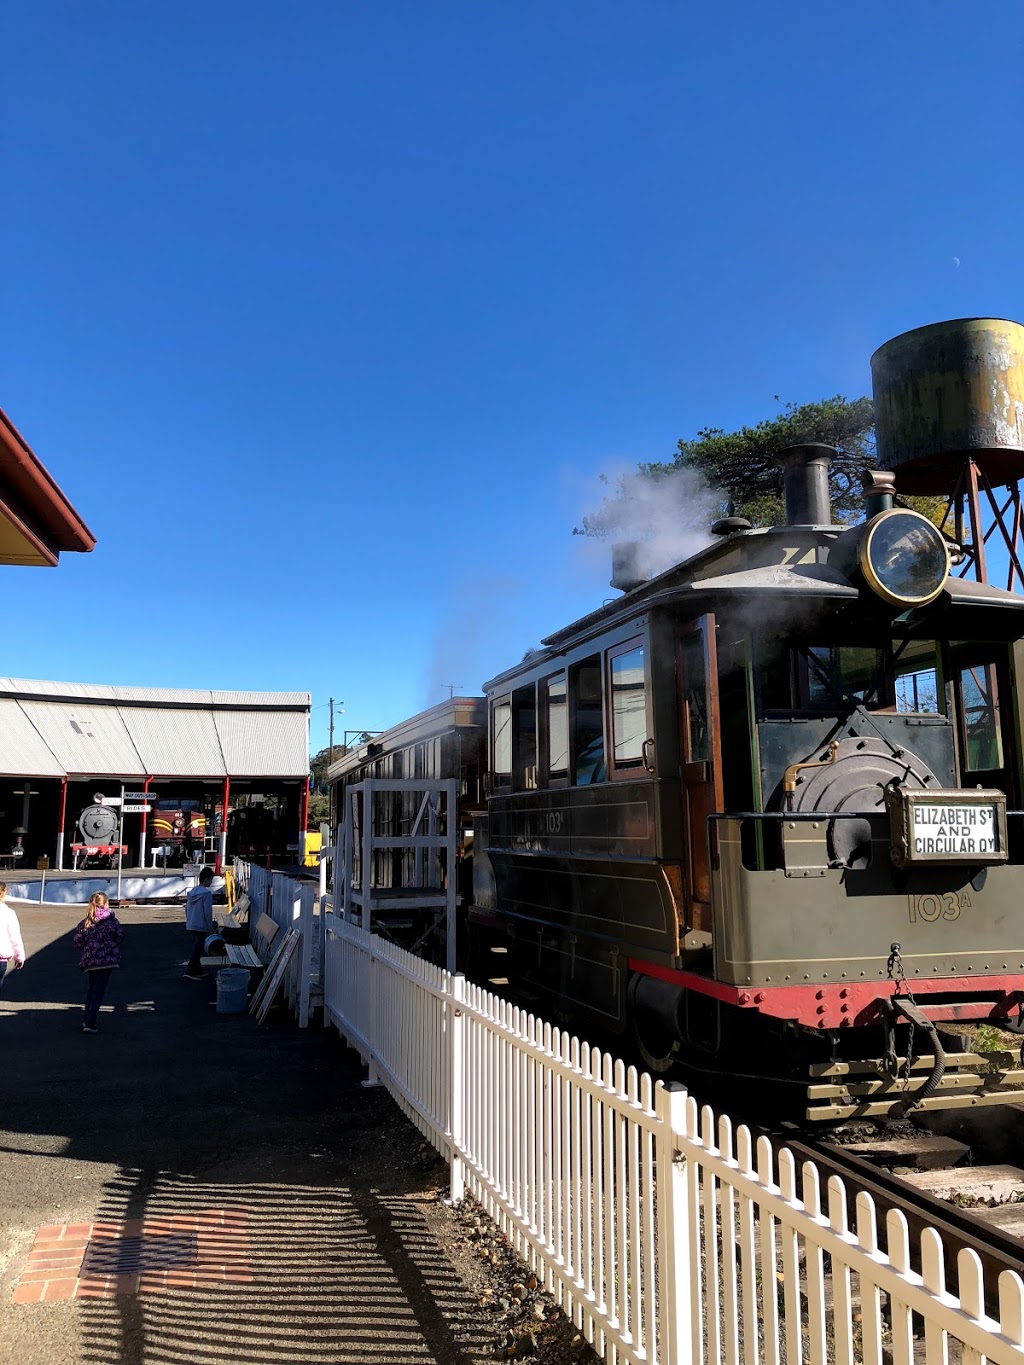 Valley Heights Locomotive Depot Heritage Museum | museum | 17 Tusculum Rd, Valley Heights NSW 2777, Australia | 0247514638 OR +61 2 4751 4638